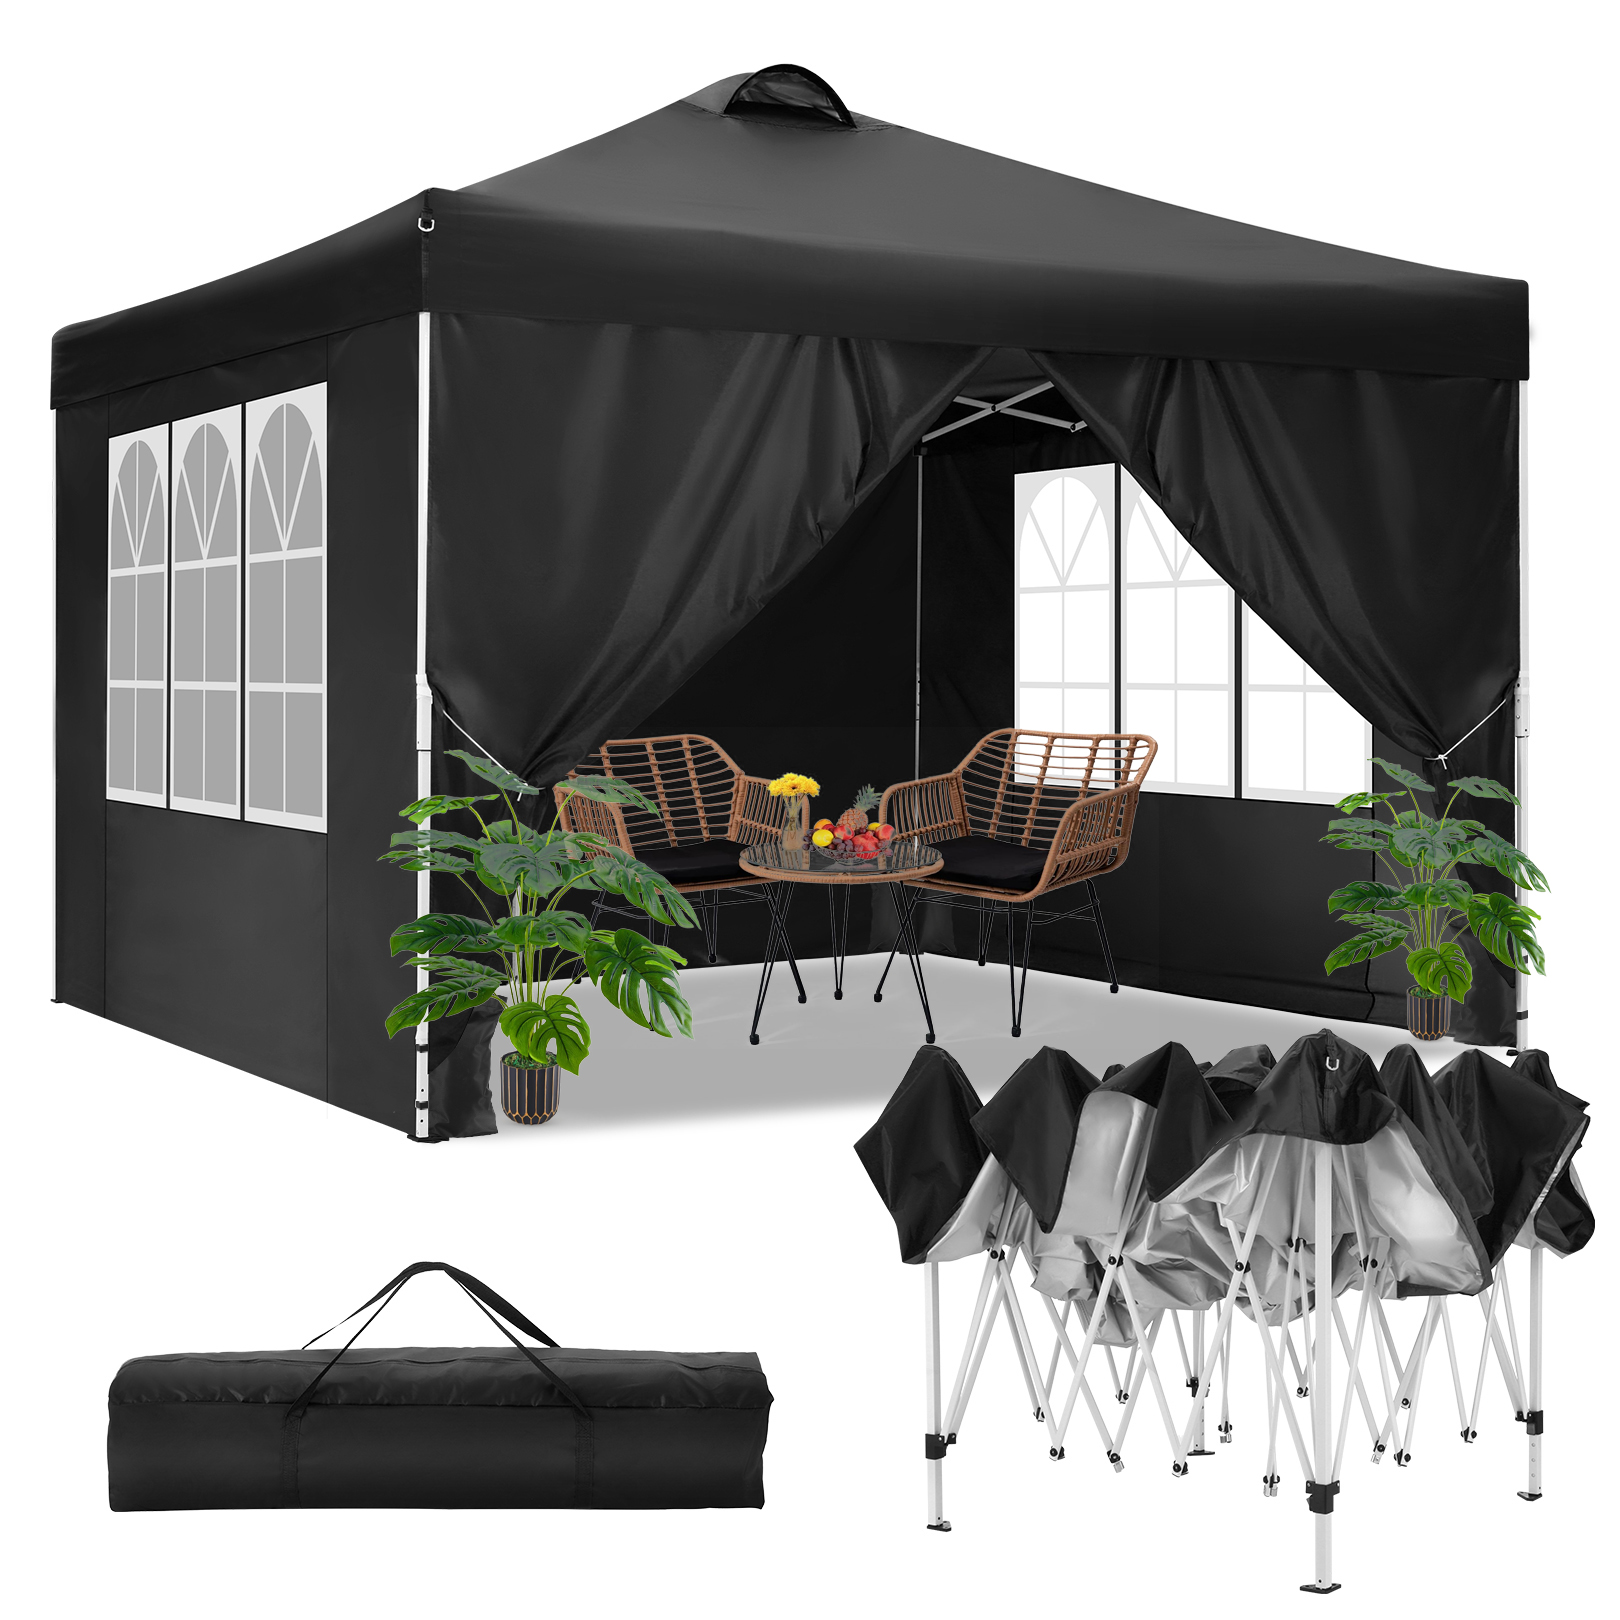 

Hoteel Canopy Tent 10x10 Pop Up Outdoor Canopies With 4 Sidewalls Waterproof Commercial Instant Gazebo Tents For Party Patio Backyard With 4 Sandbags, 4 Stakes & 8 Ropes, Black